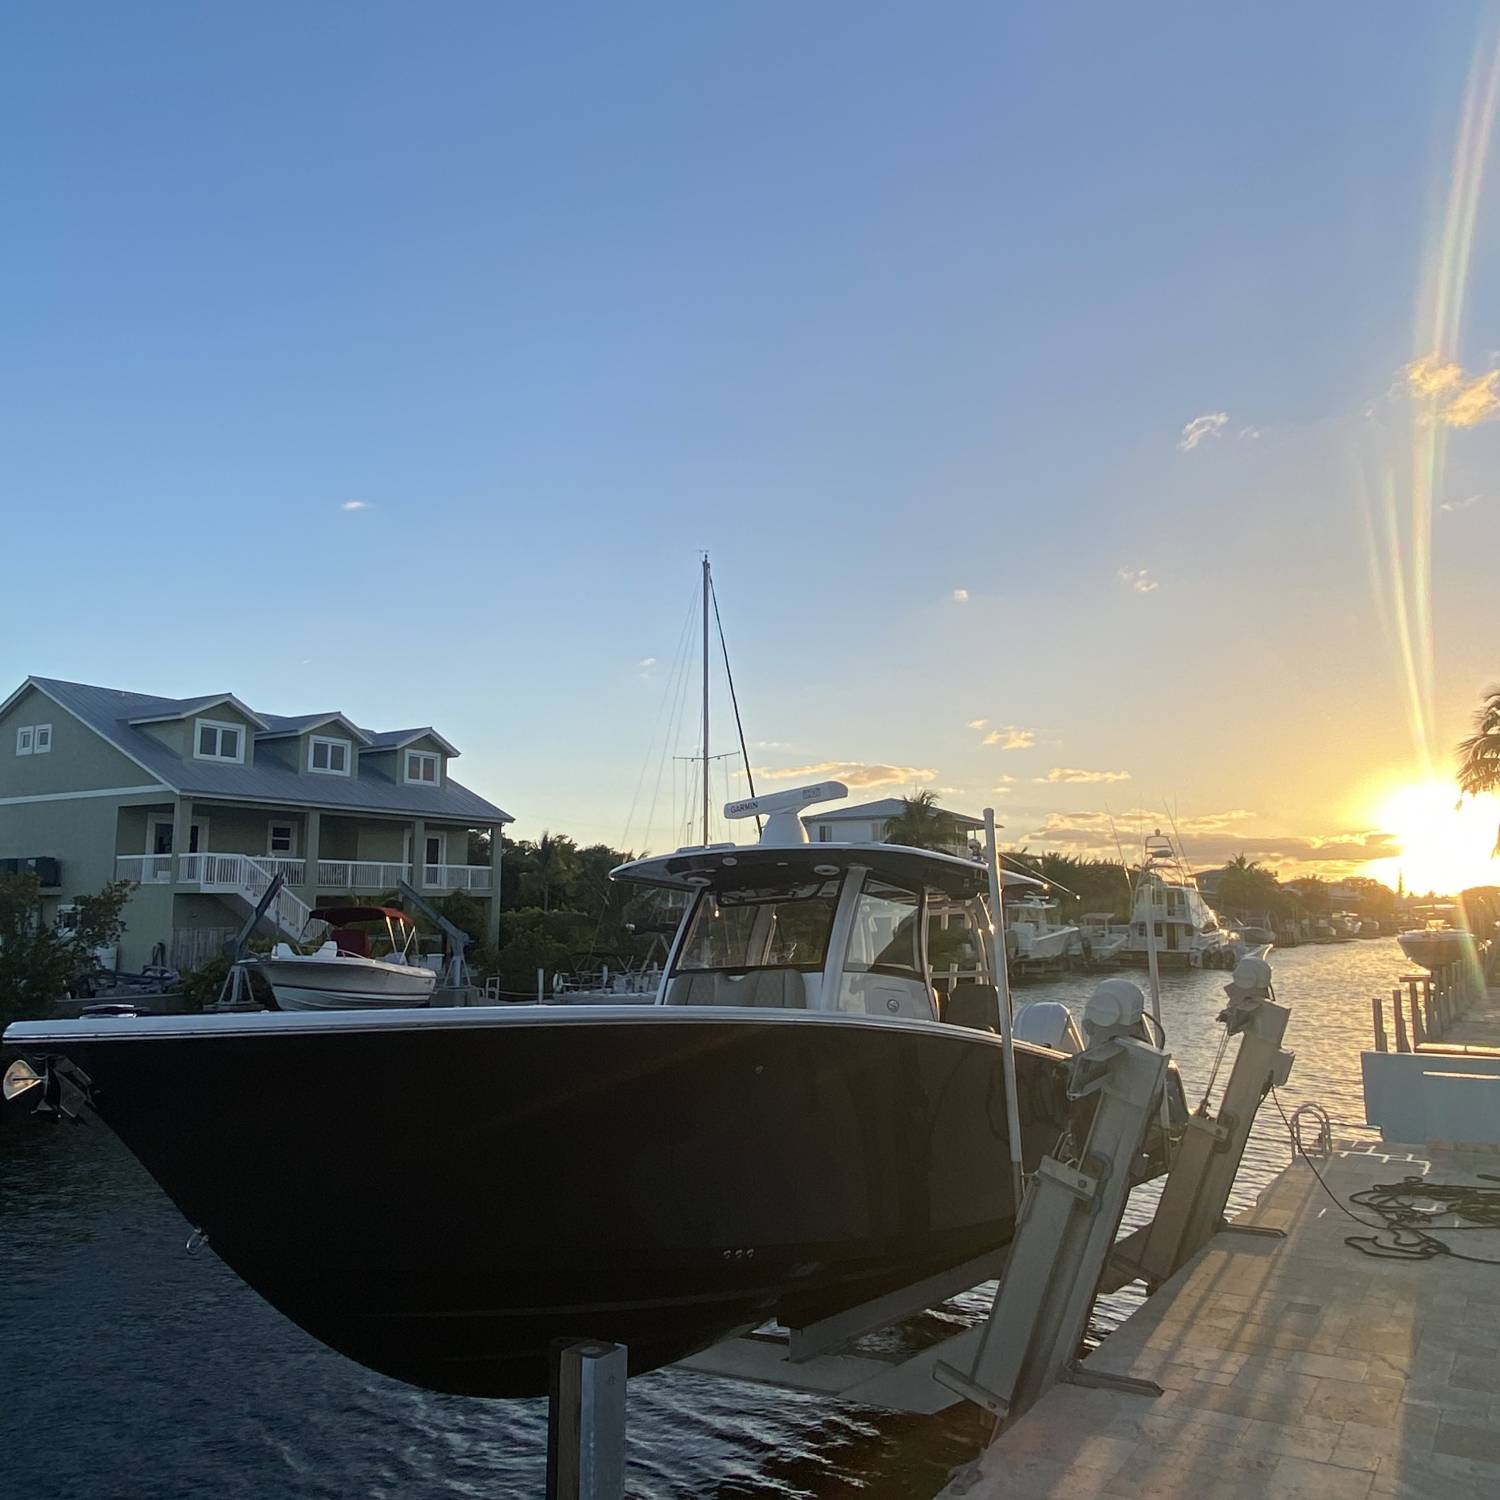 Title: Sunset - On board their Sportsman Open 352 Center Console - Location: Key largo. Participating in the Photo Contest #SportsmanJune2023